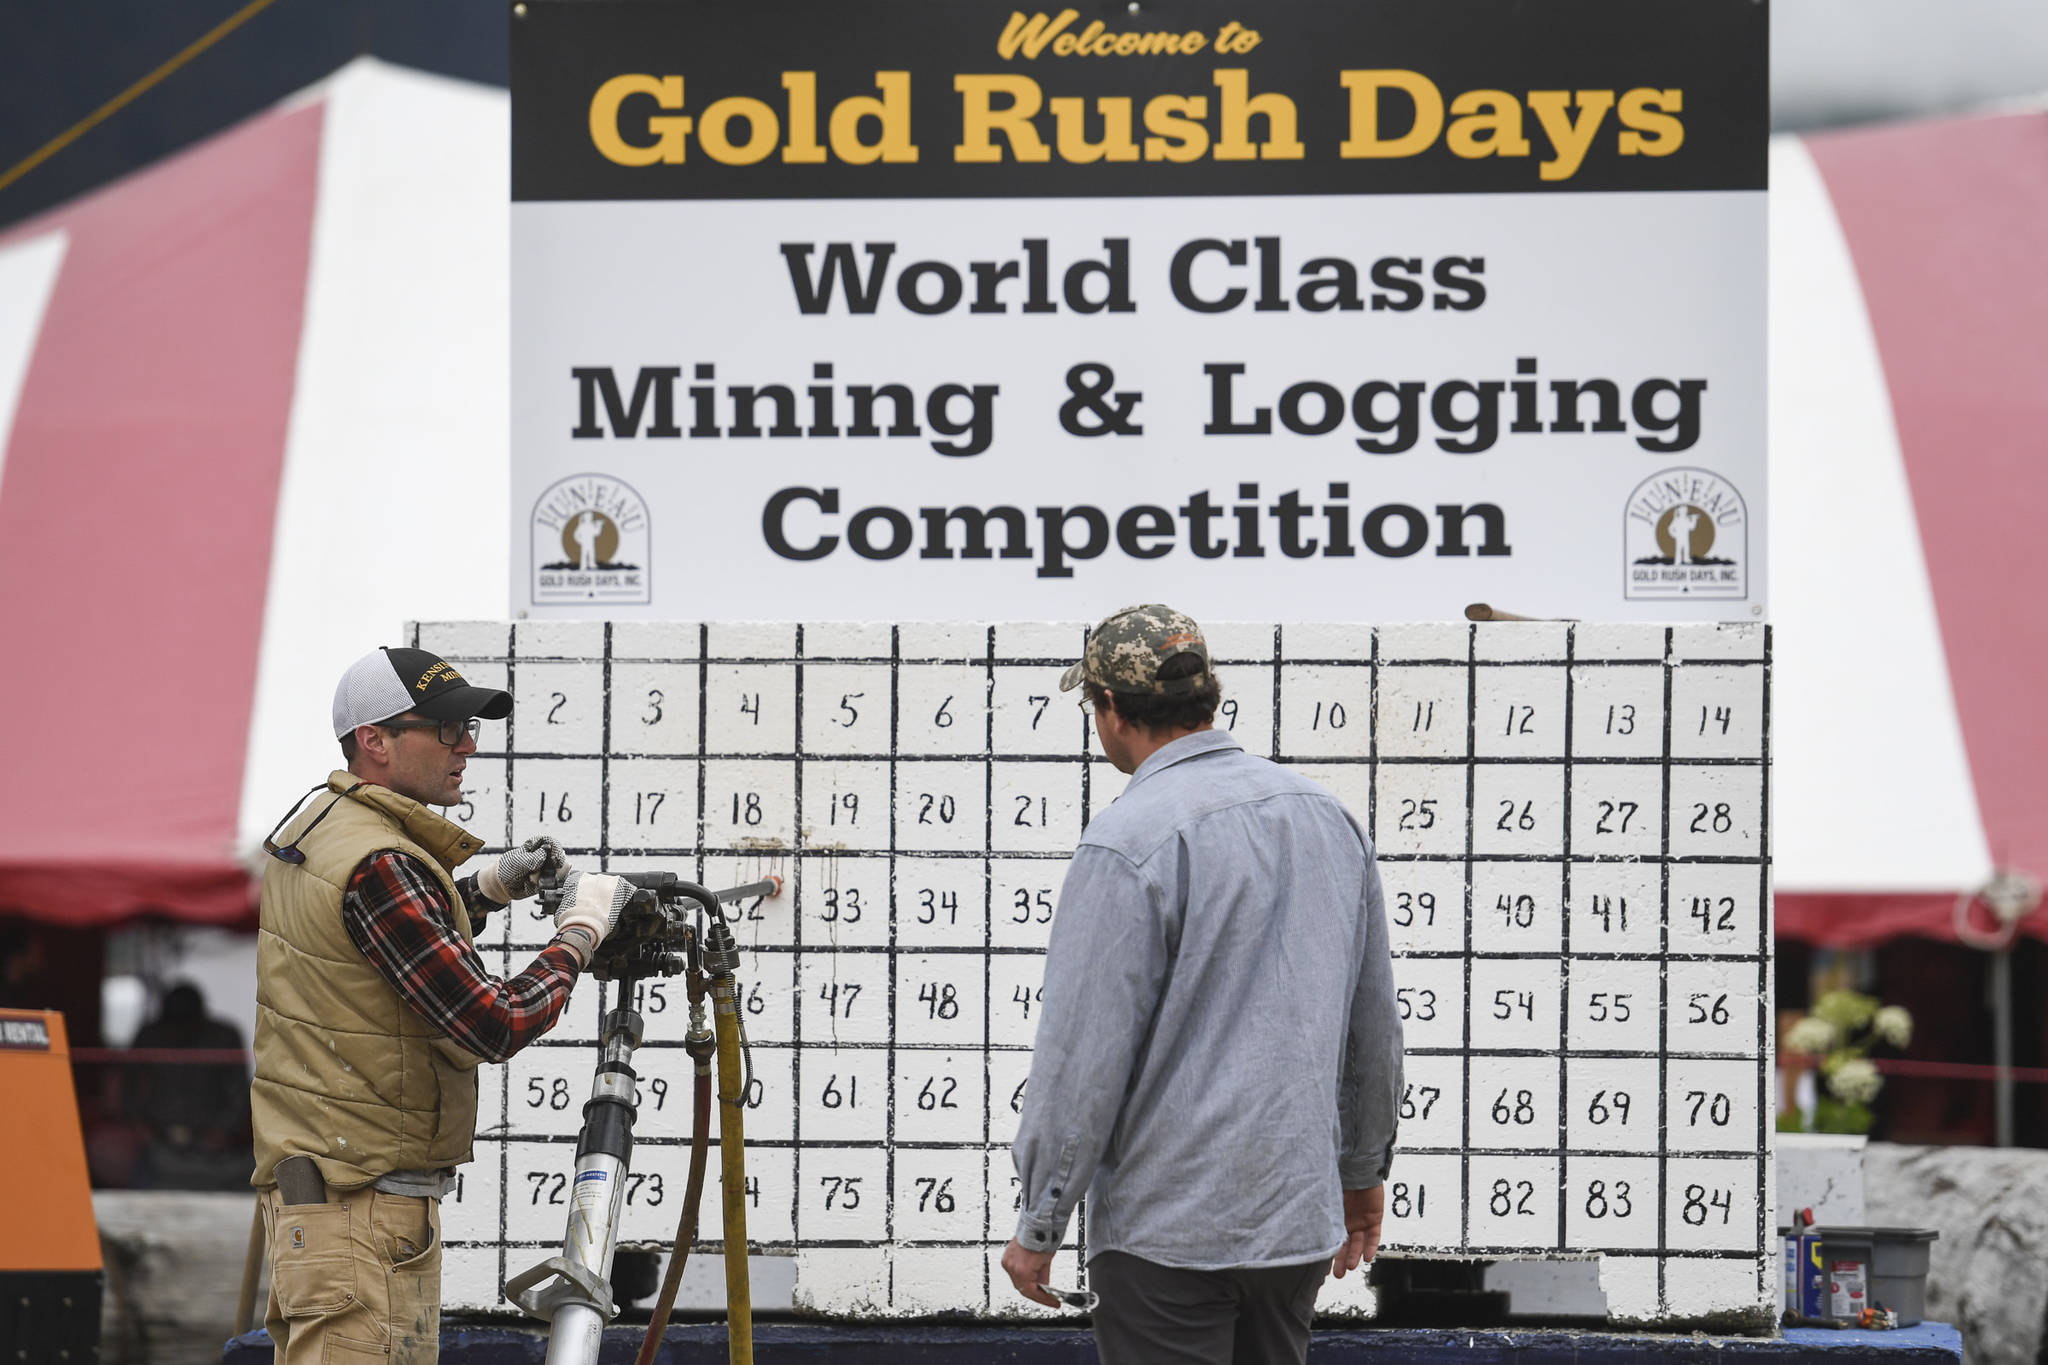 Jesse Stringer, left, explains the jackleg drill to fellow contestant Jesse Ross in the Mining & Logging Competition at the 29th Annual Gold Rush Days at Savikko Park on Saturday, June 22, 2019. (Michael Penn | Juneau Empire)